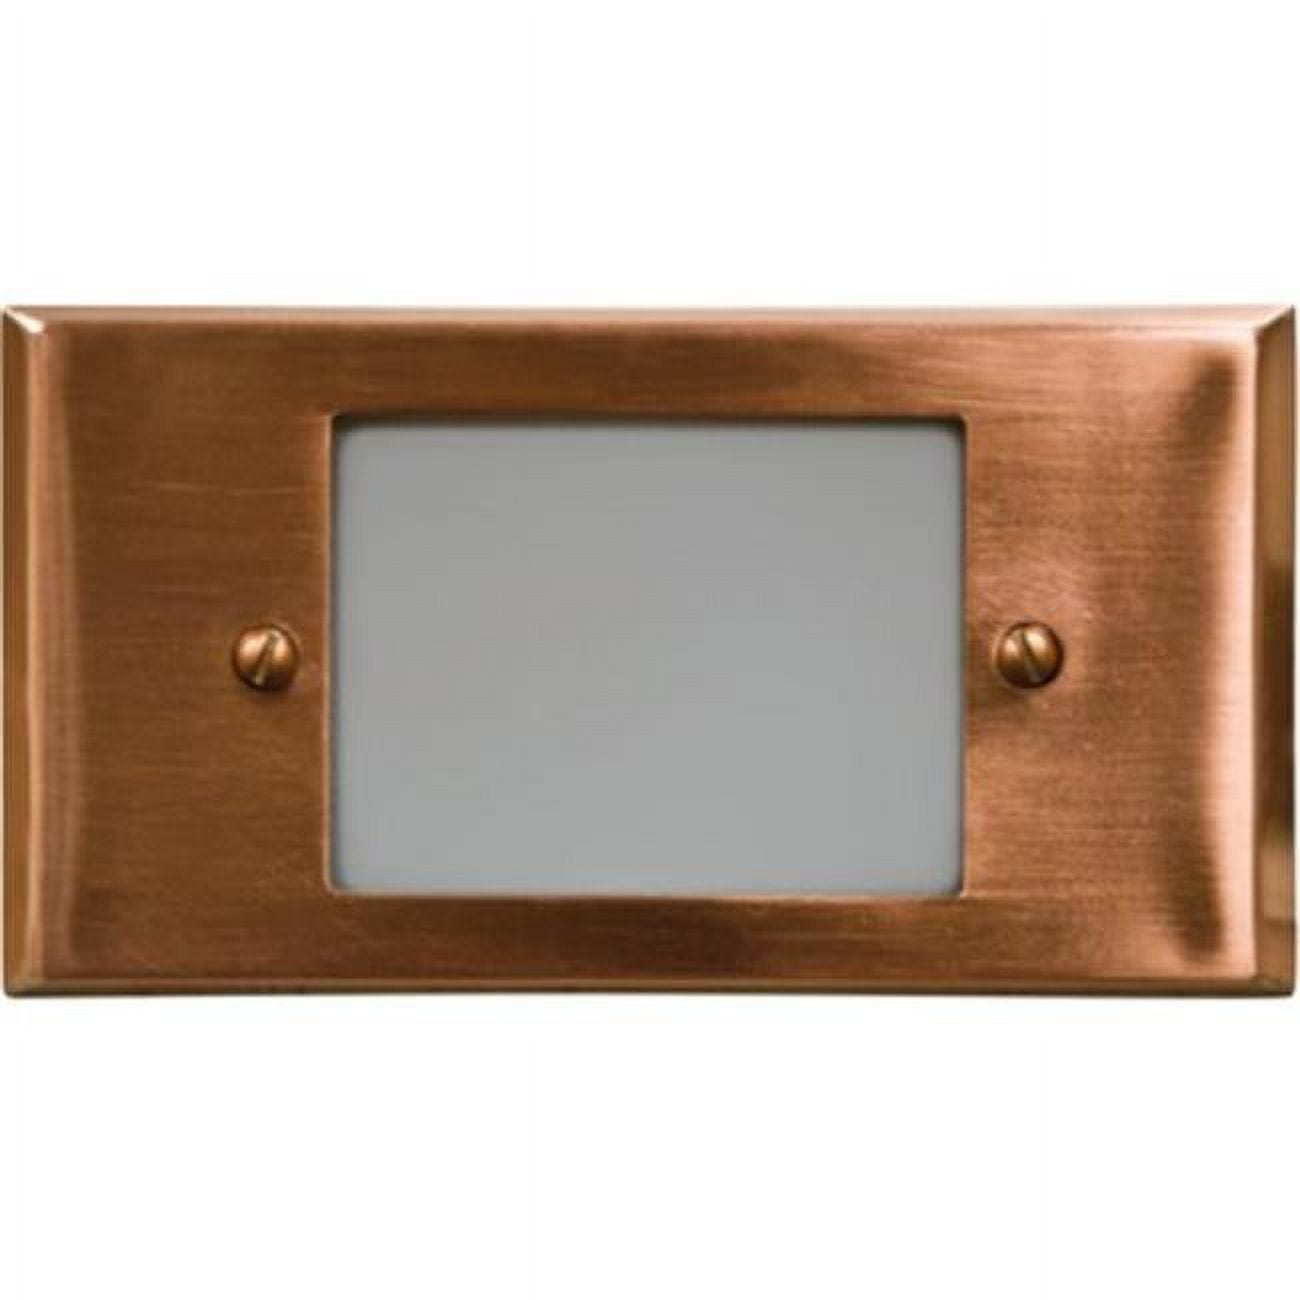 Picture of Dabmar Lighting LV612-CP 12V Open Face Brass Recessed Brick Step Wall Light, 21W - Copper